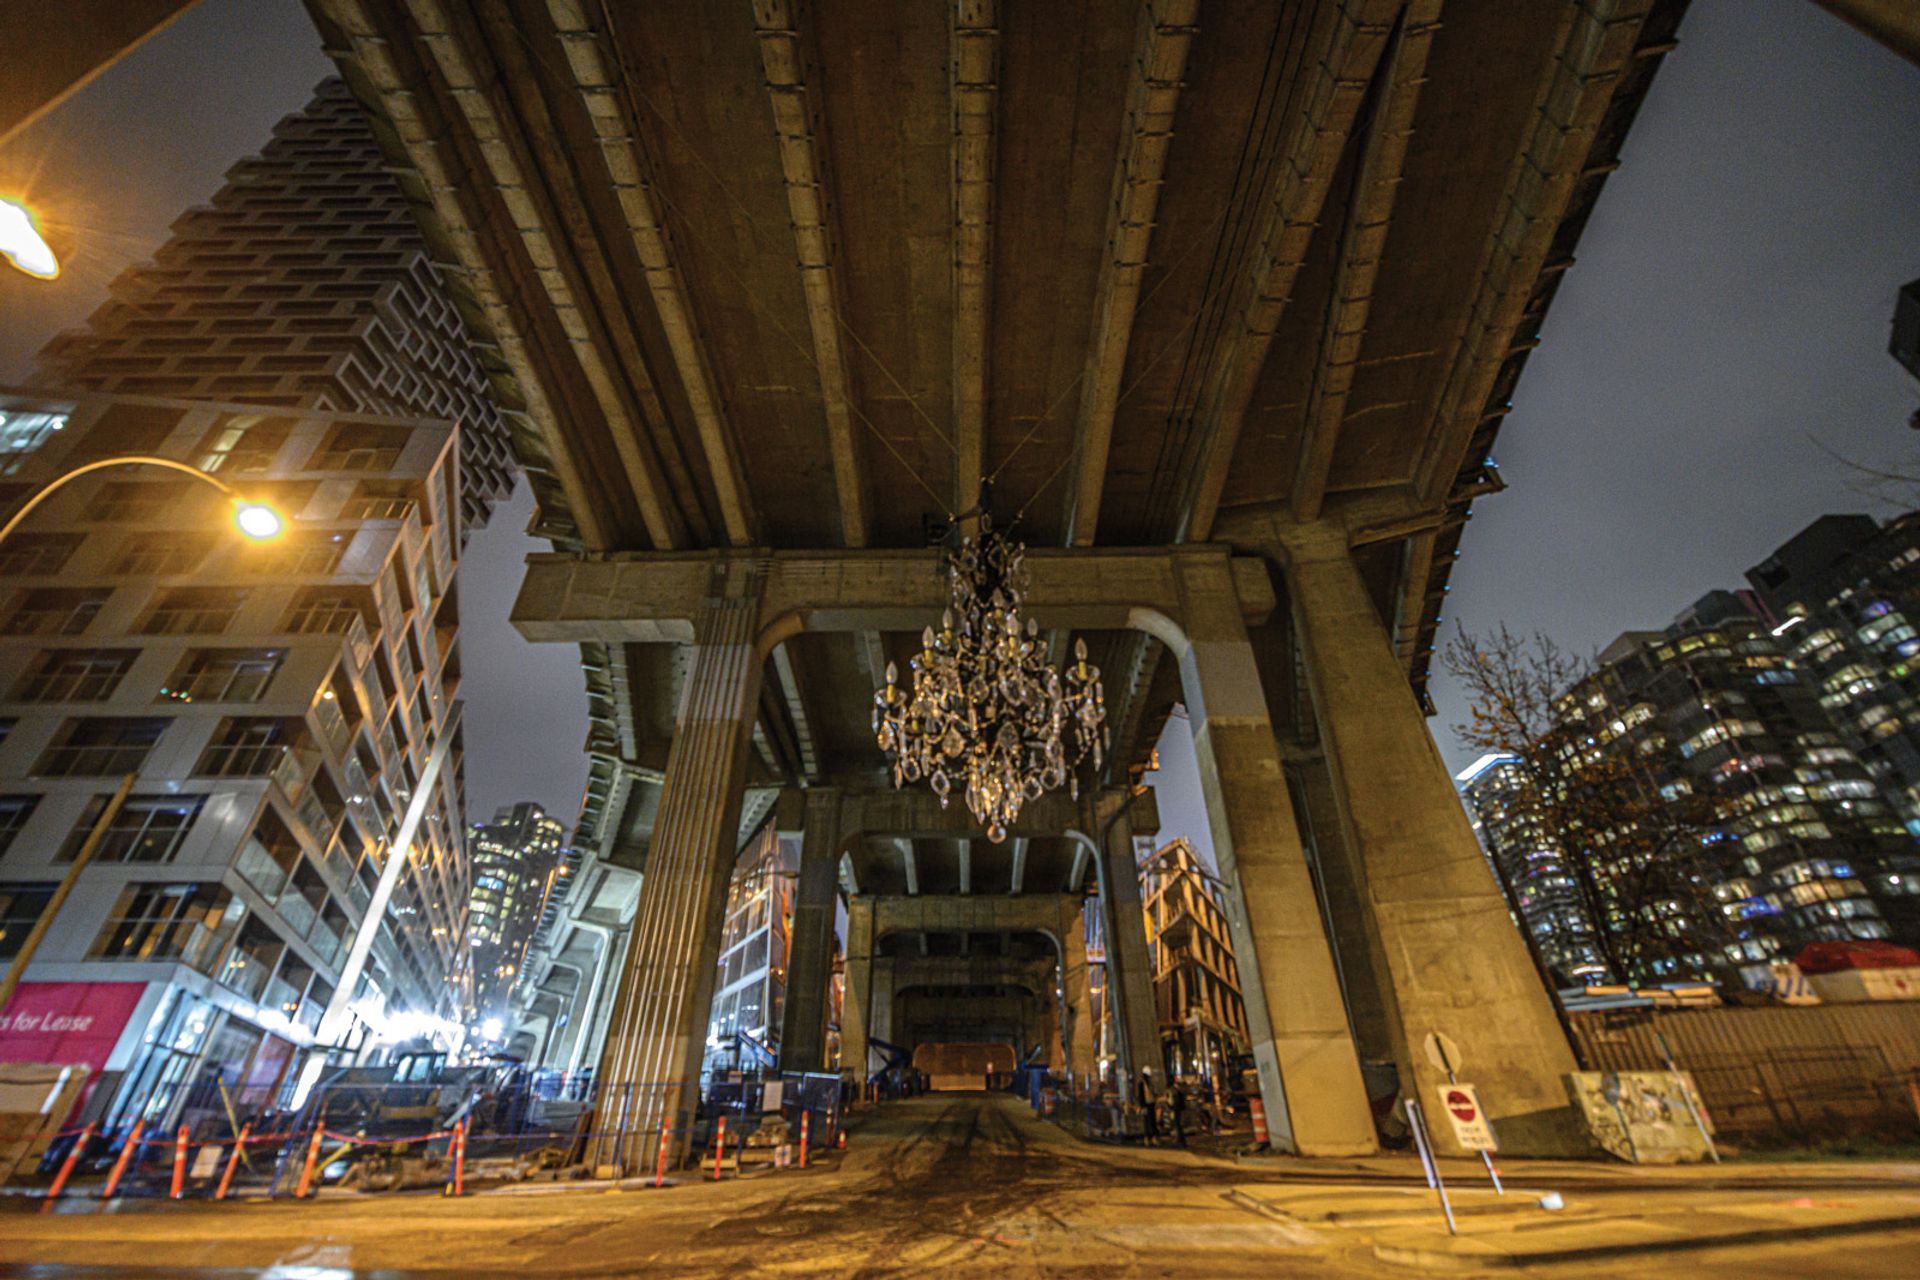 A “let them eat cake” moment: the huge chandelier hangs under a bridge that was once a haven for the homeless Mark Teasdale